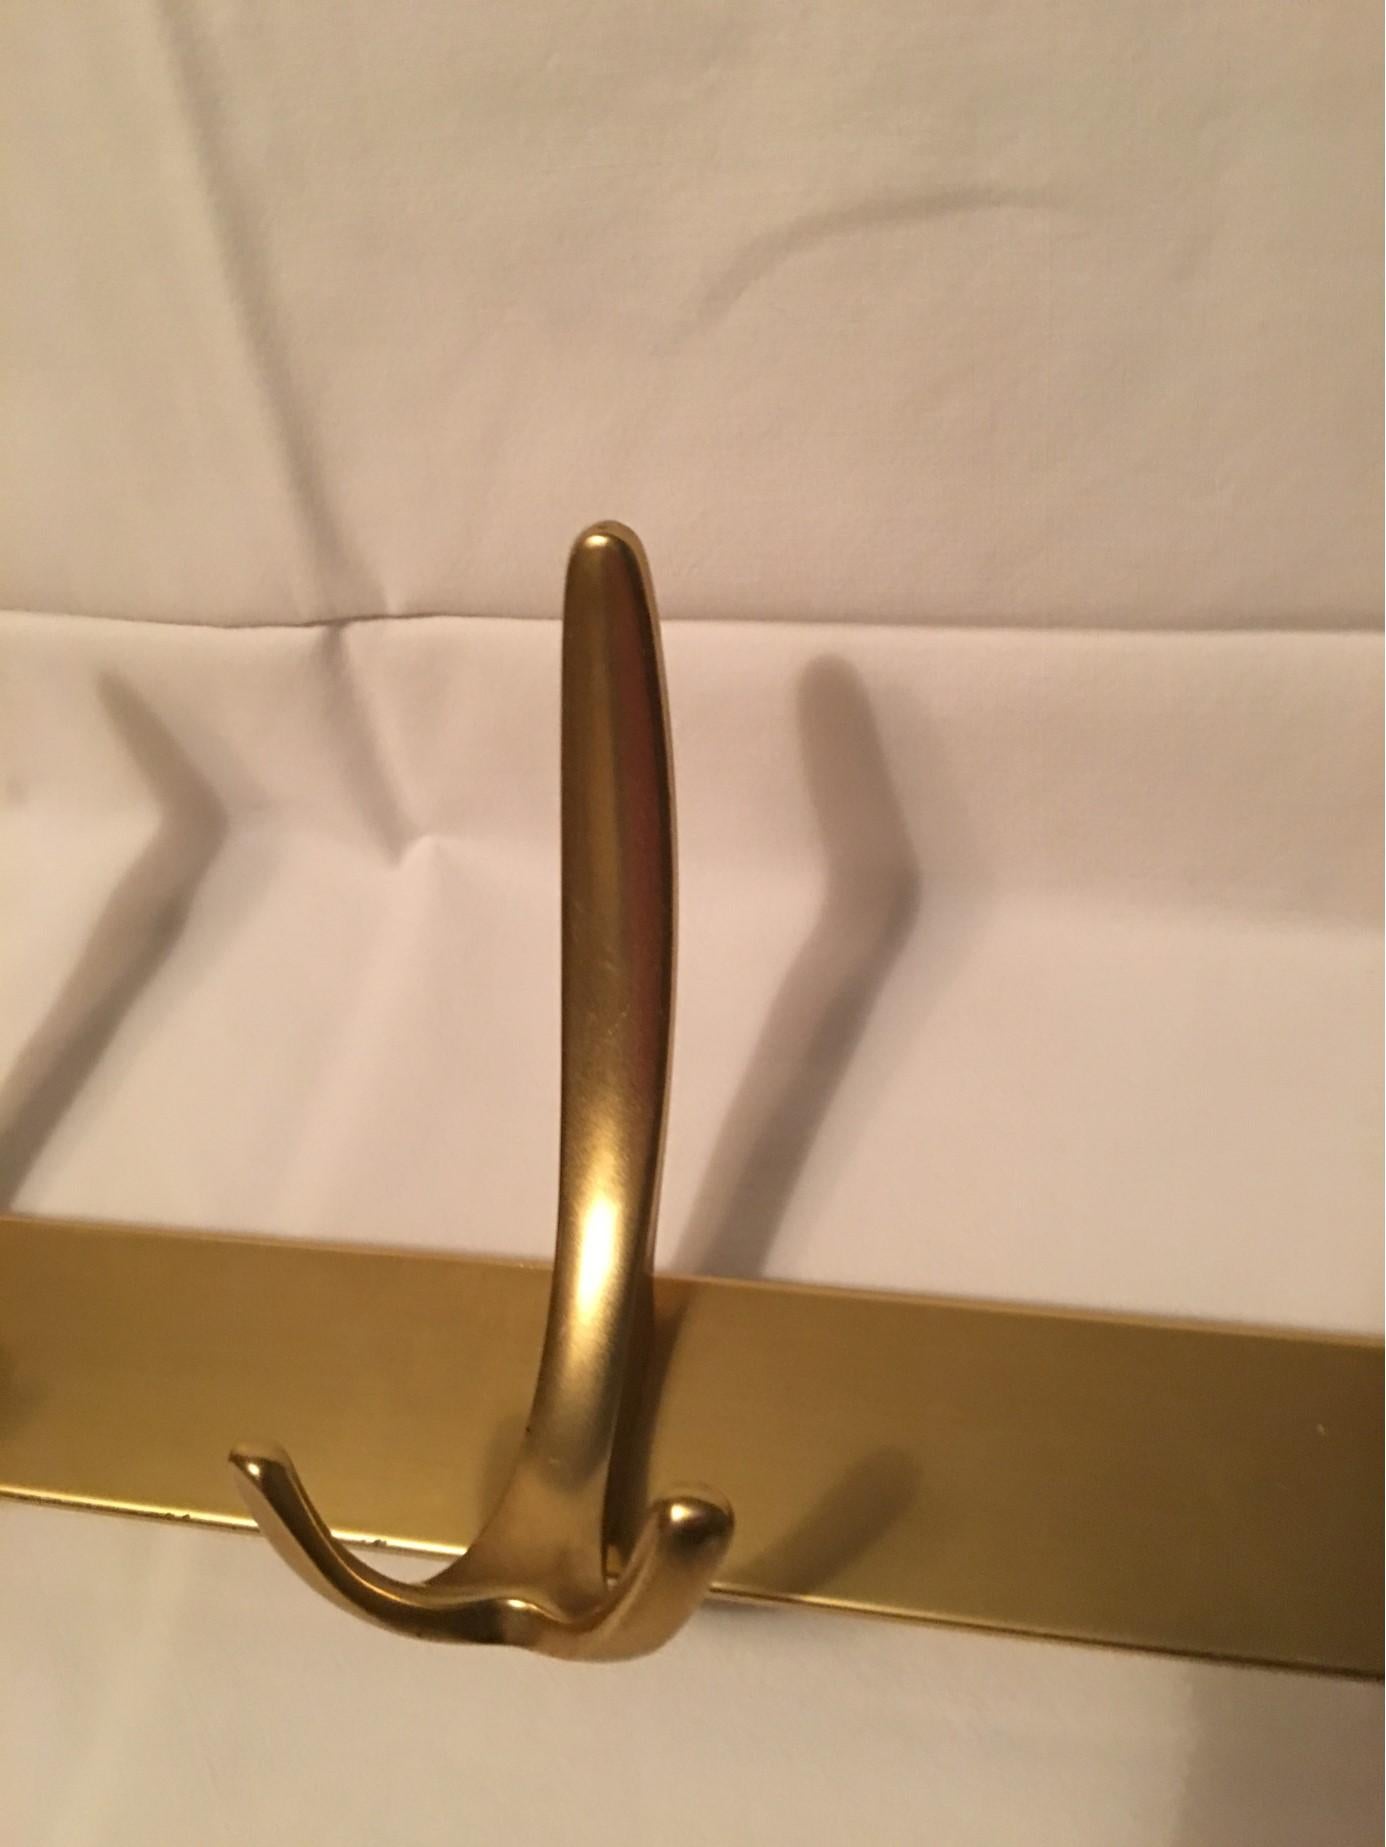 1950s Minimalist Wall Hook for Coats In Good Condition For Sale In Frisco, TX